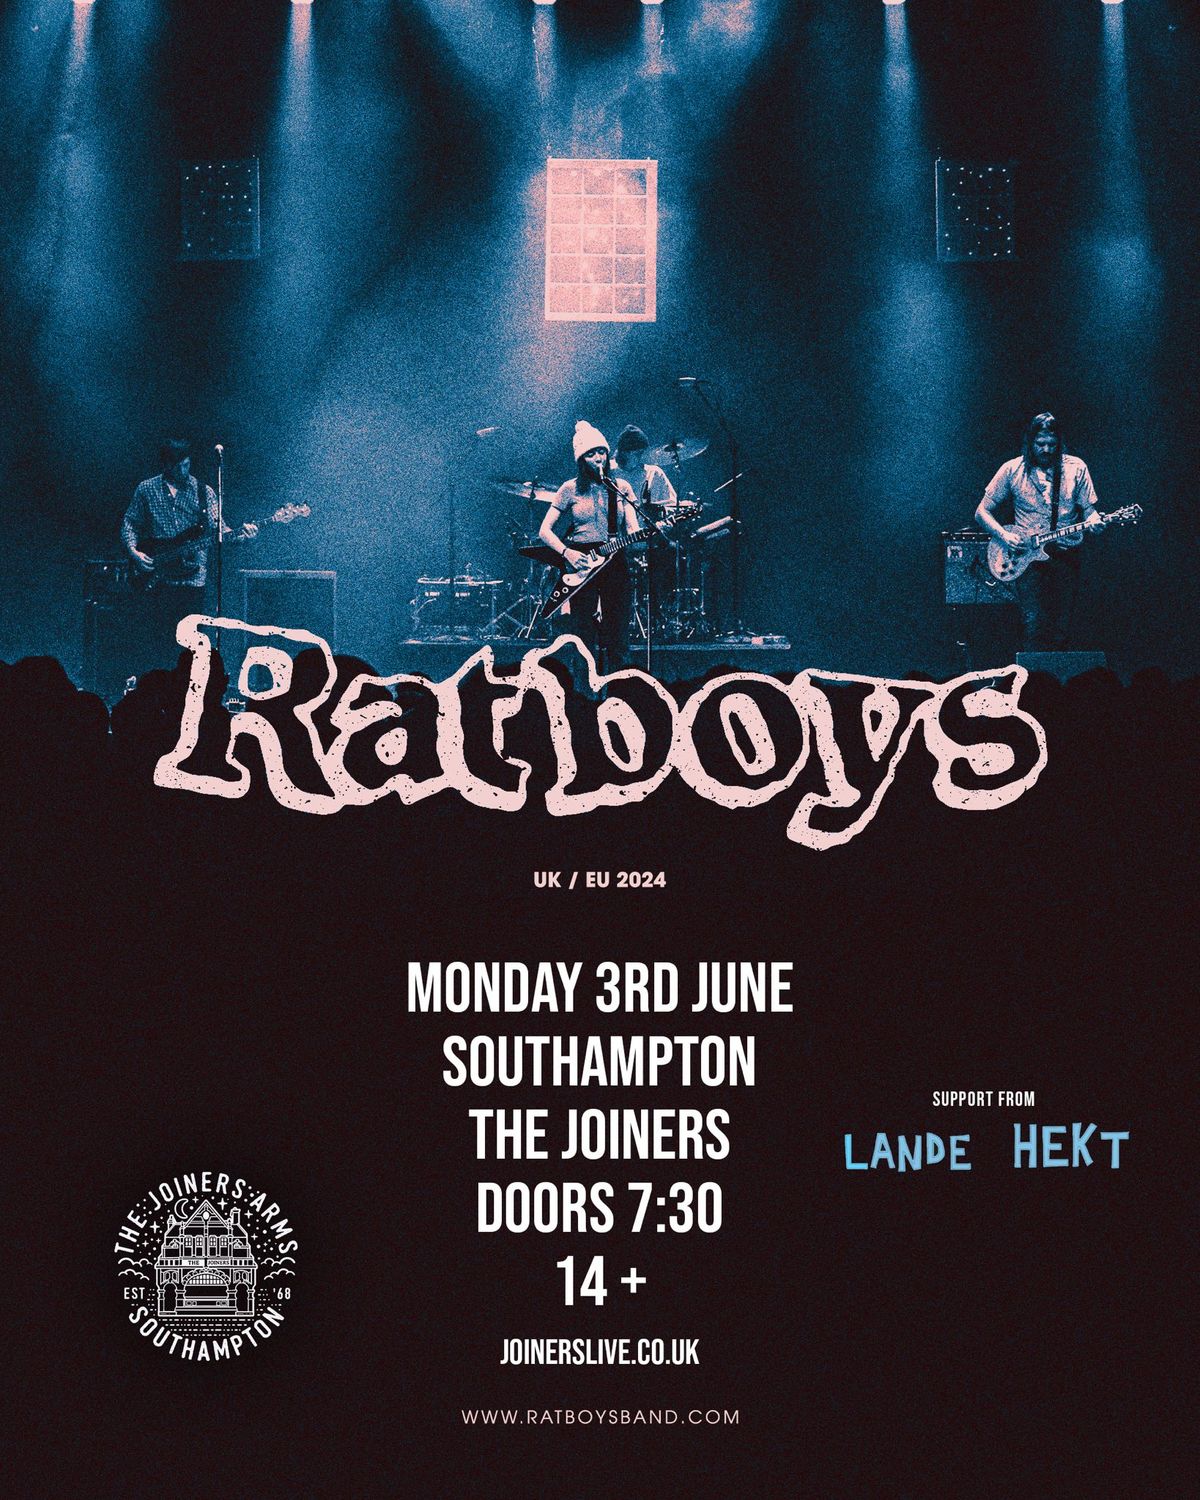 Ratboys + Lande Hekt at The Joiners, Southampton